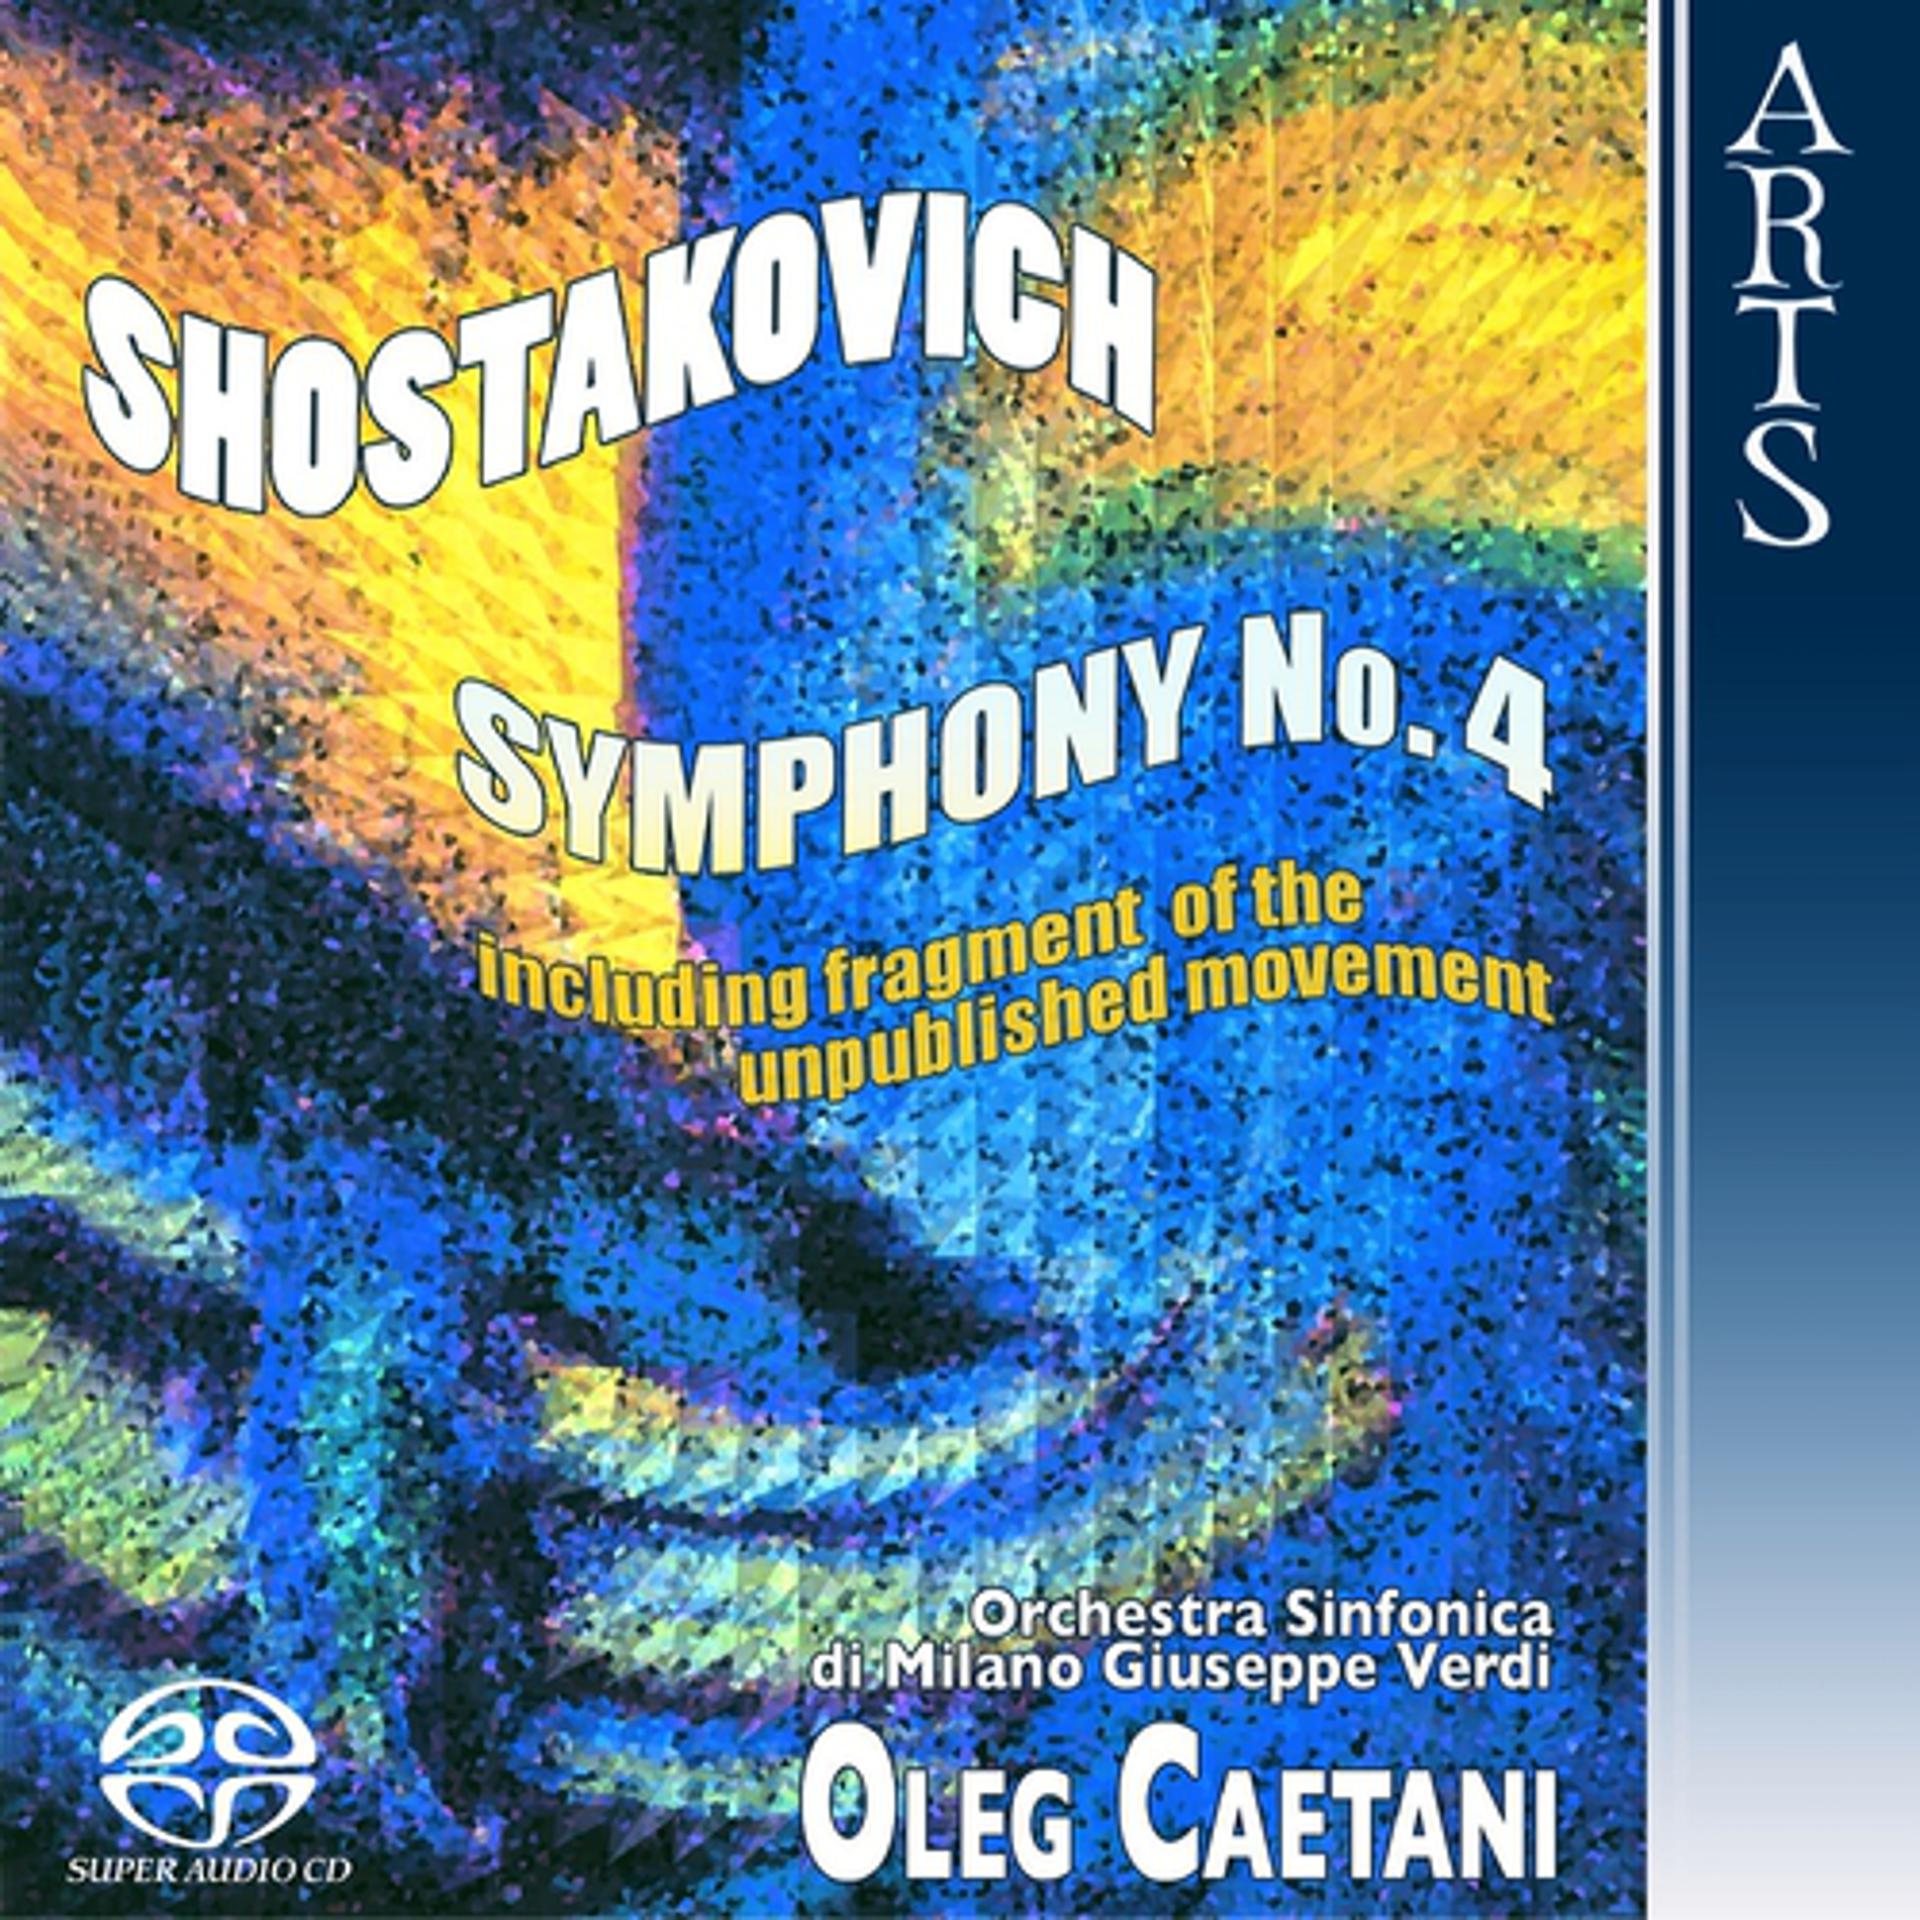 Постер альбома Shostakovich: Symphony No. 4, Op. 43, including Fragments of the Unpublished Movement